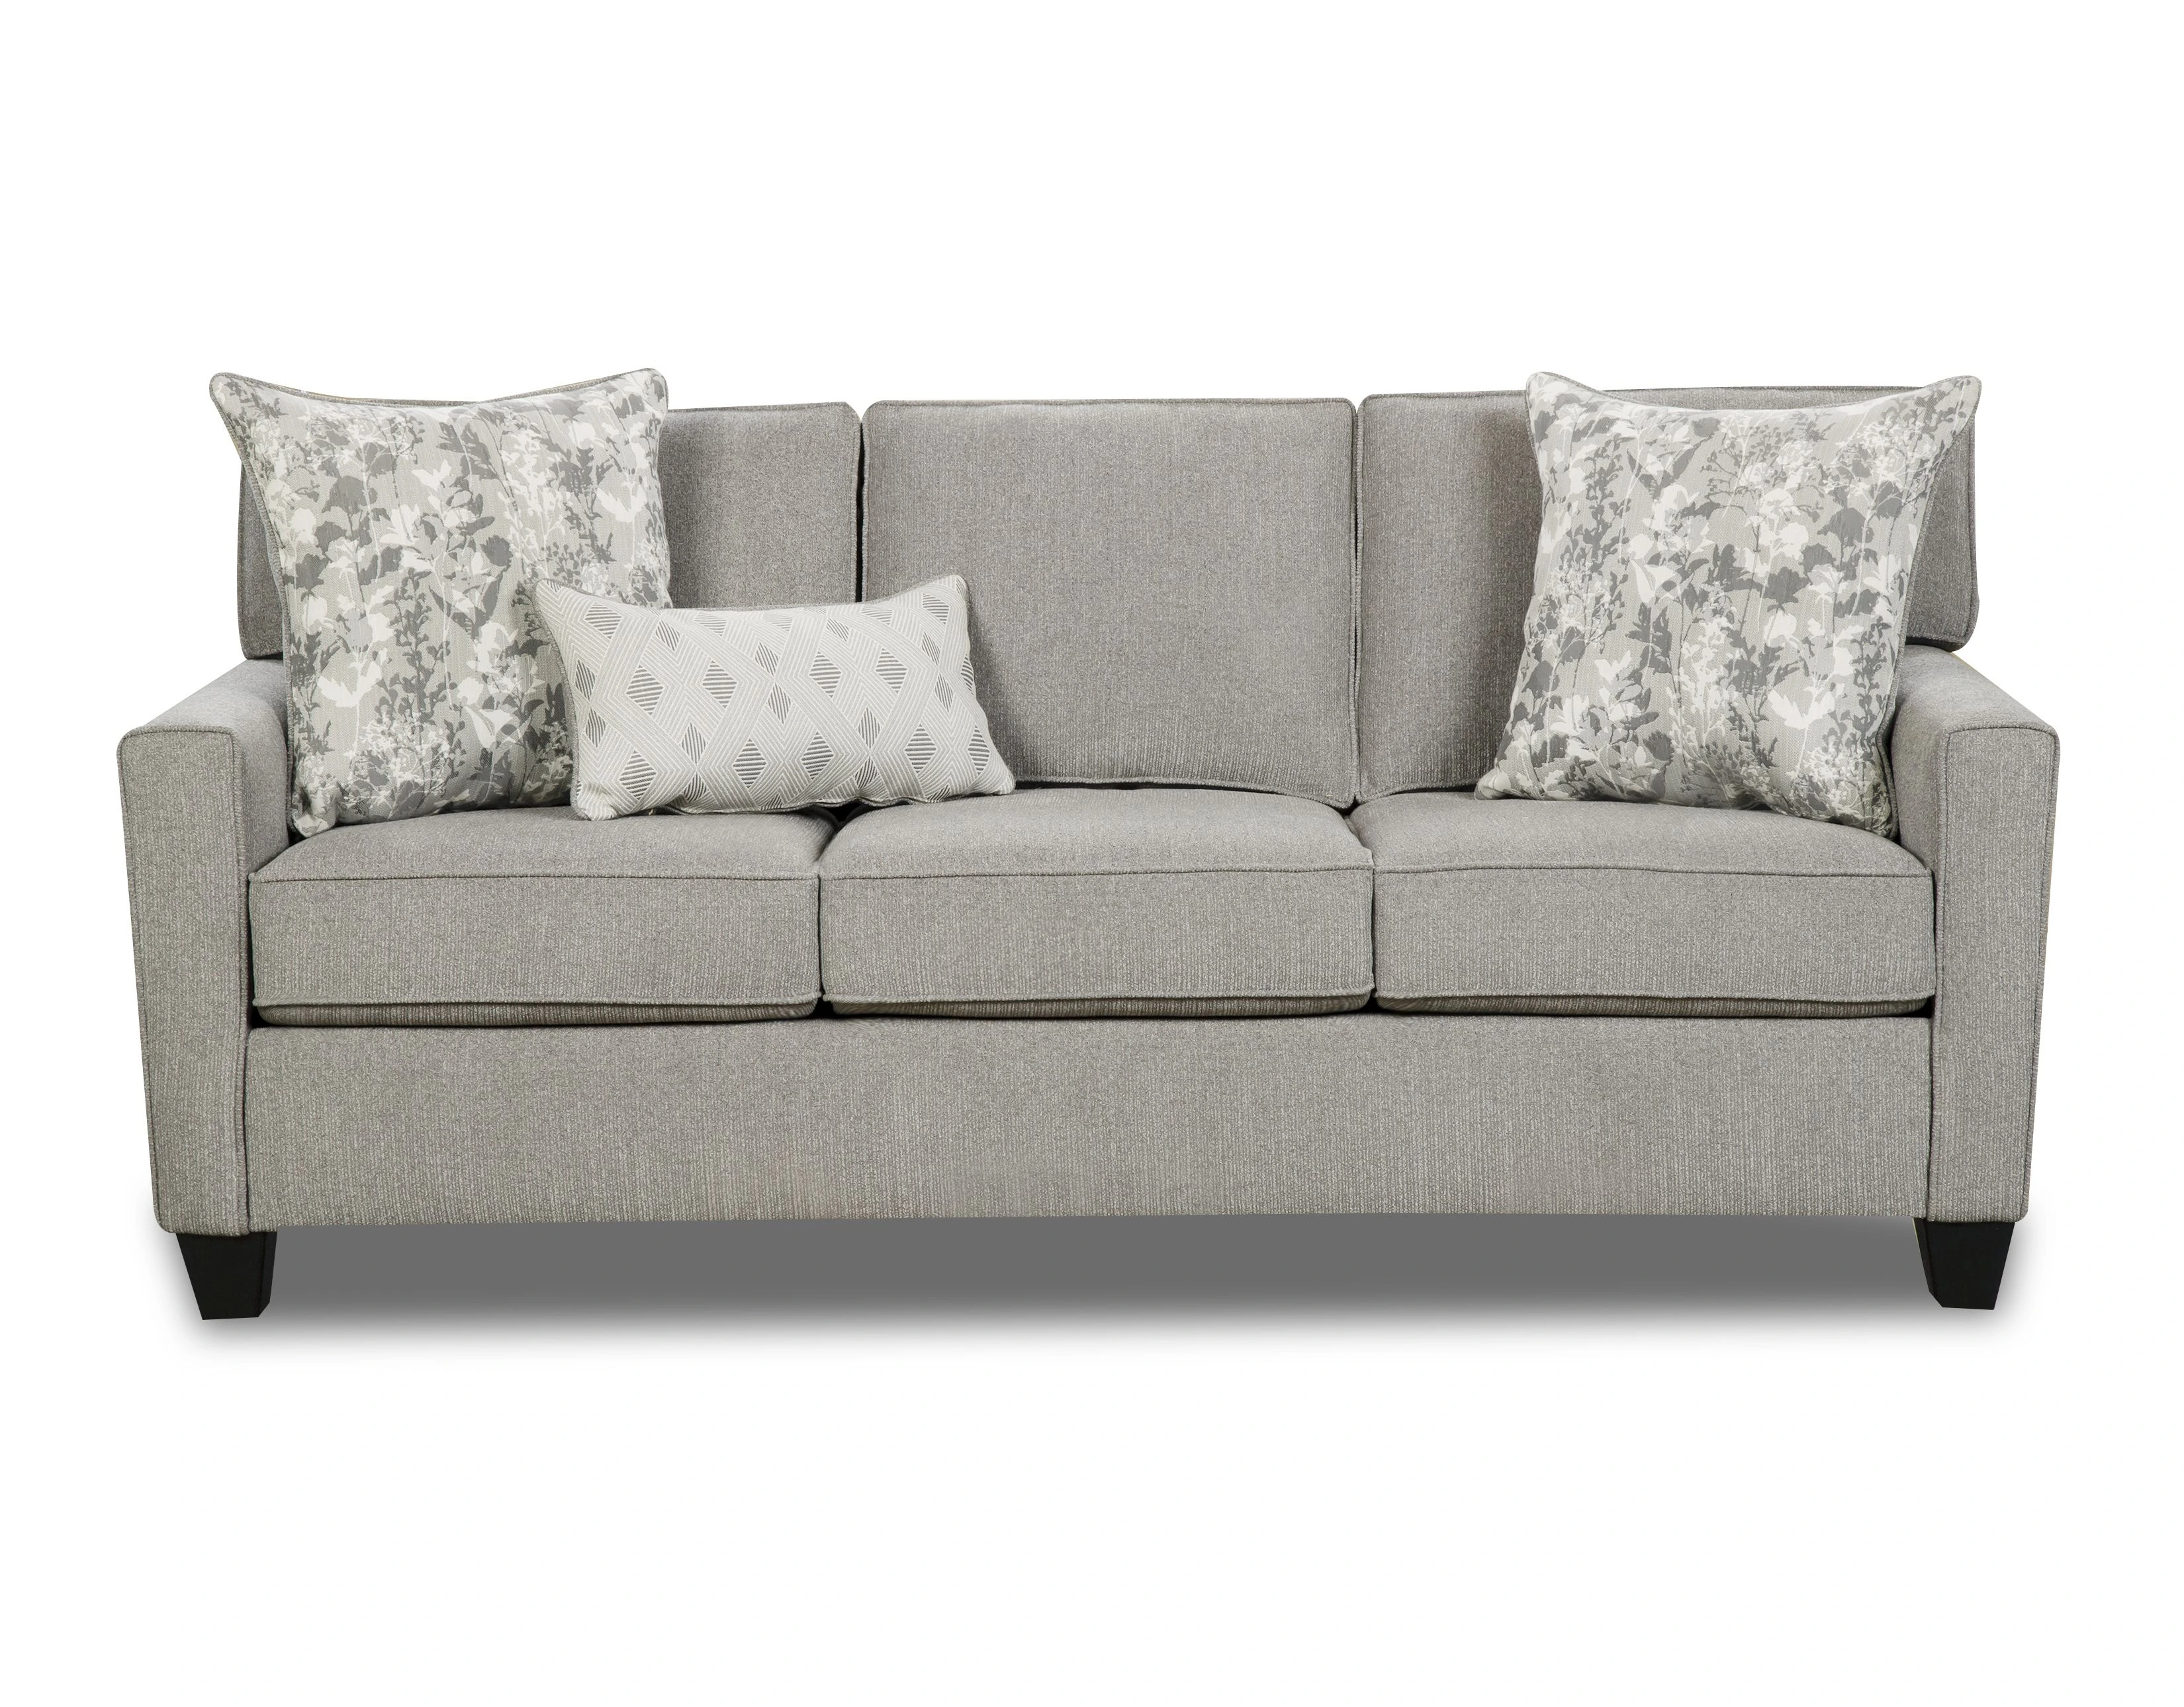 How Much Does It Cost to Reupholster a Couch | Bob Mills Furniture